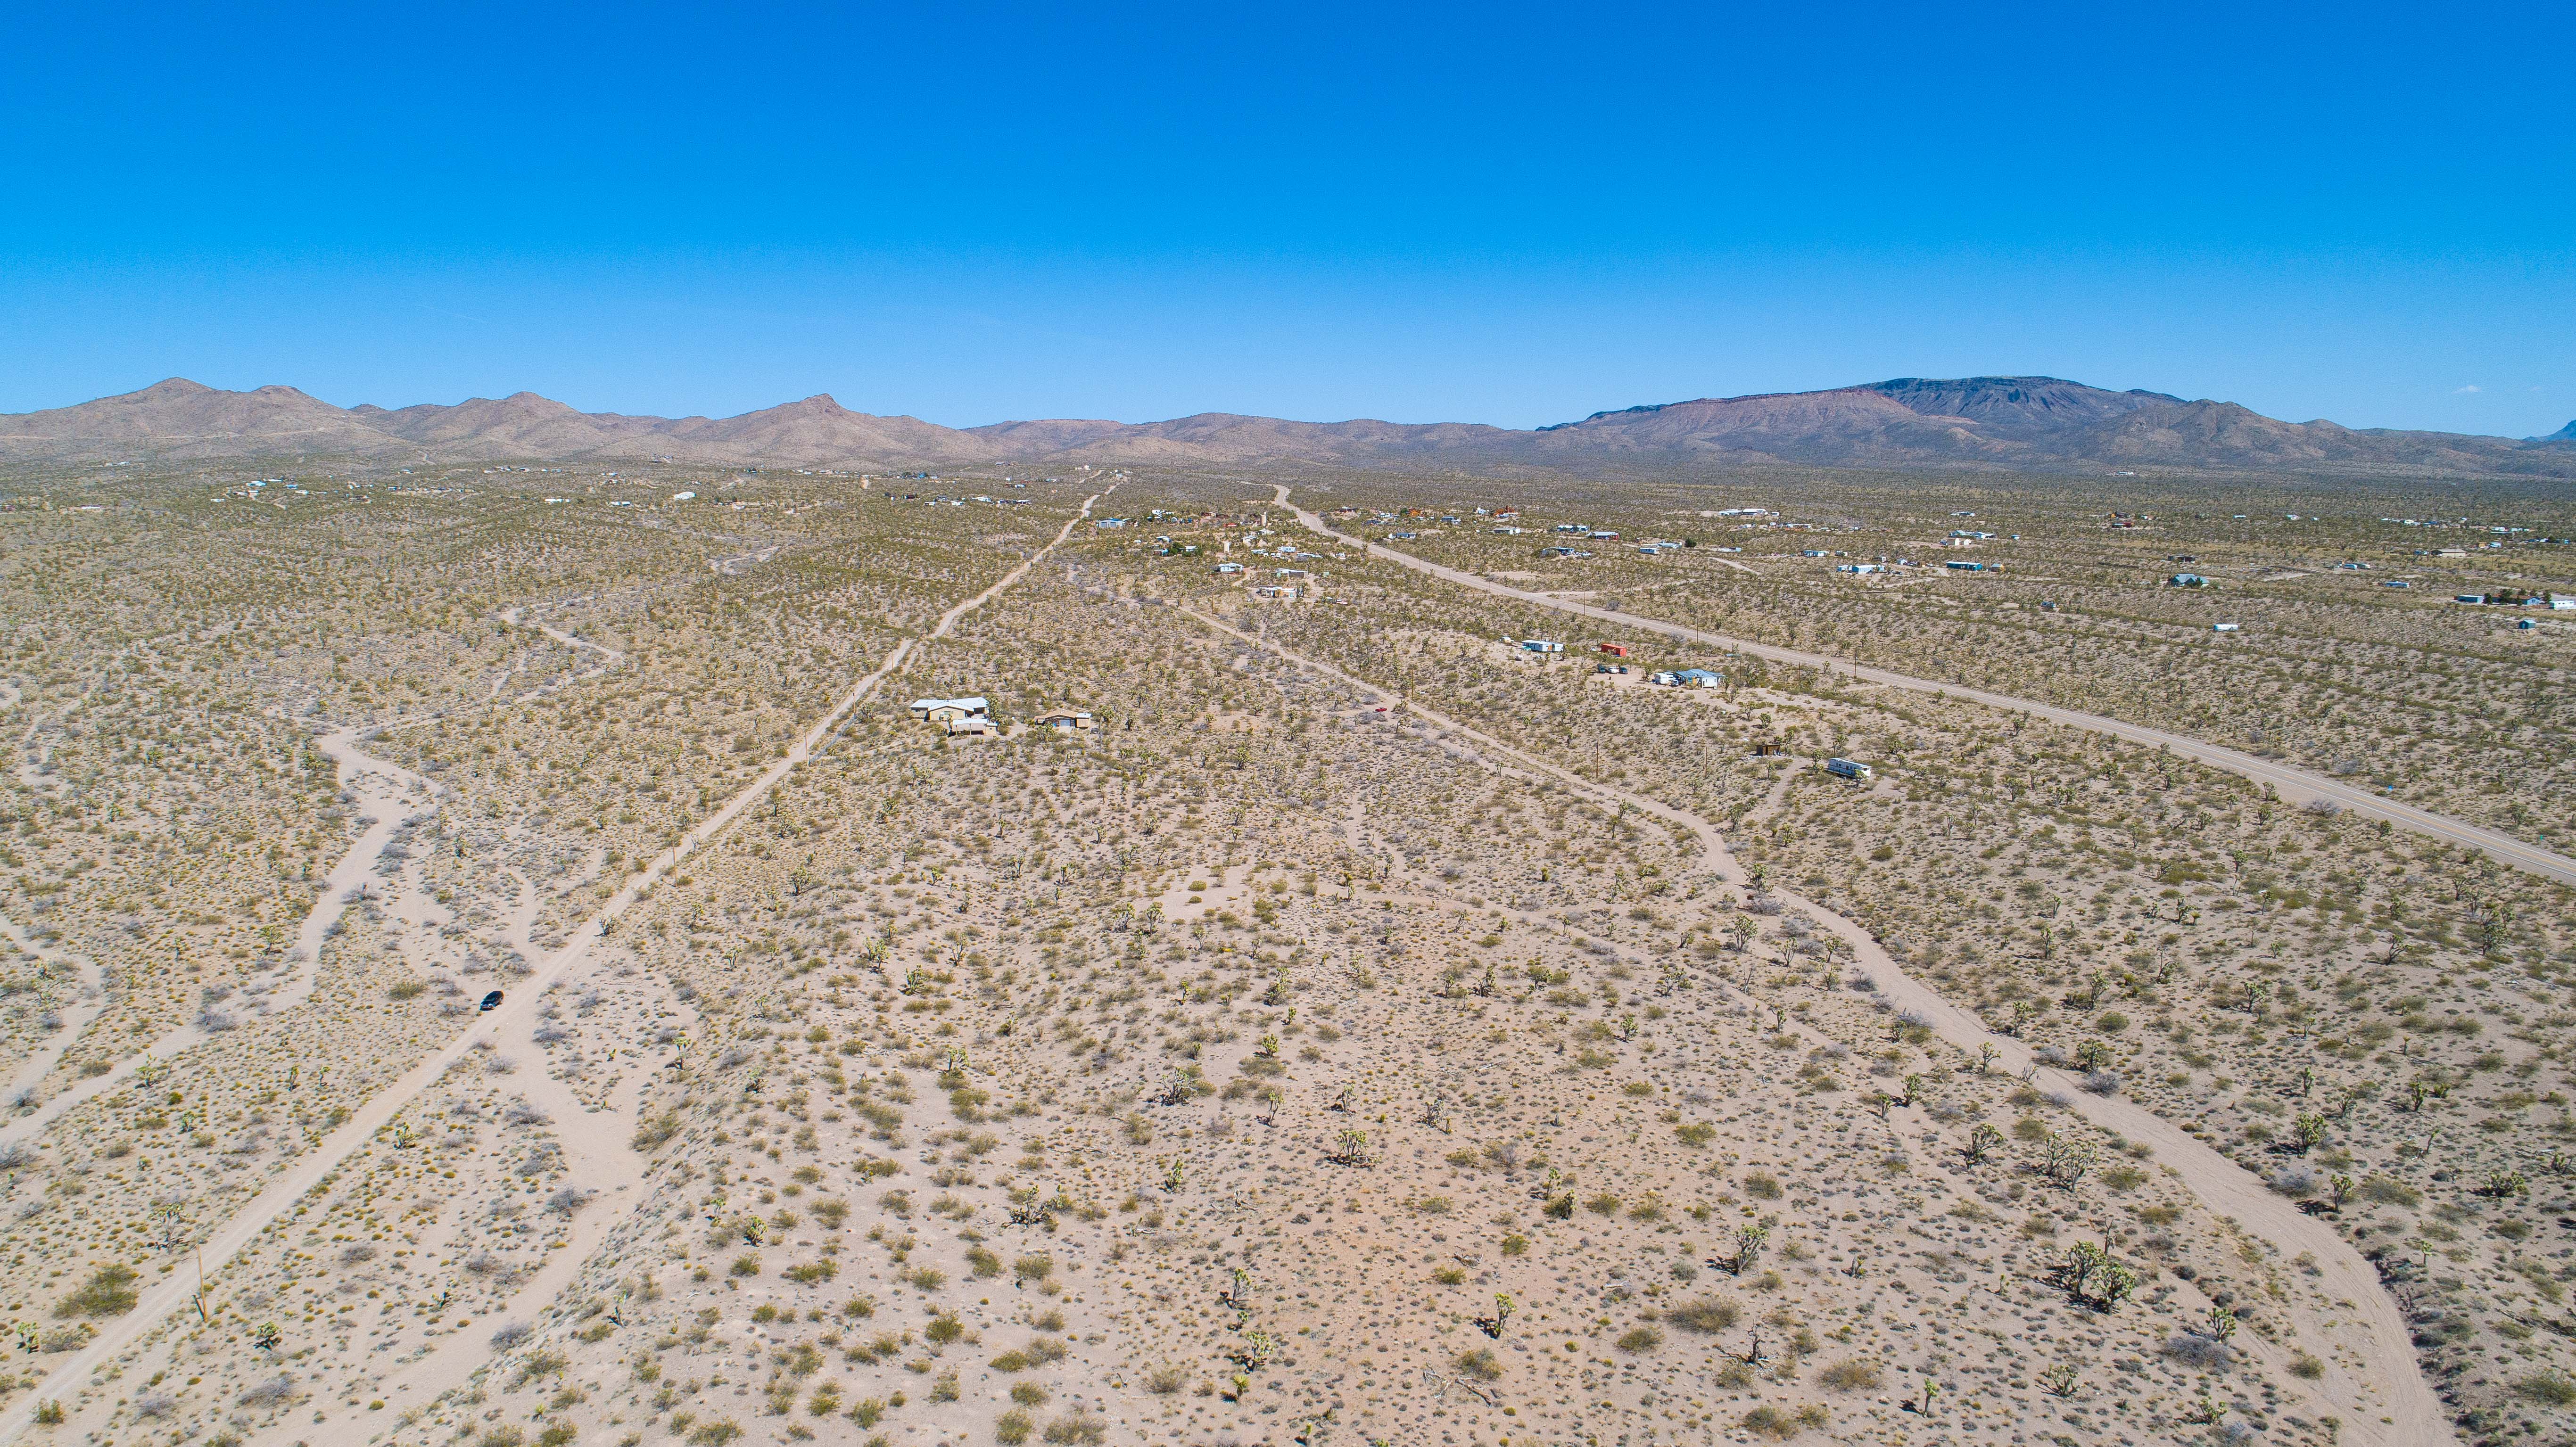 10 Reasons Why You Want to Buy This 1 Acre of Arizona Land